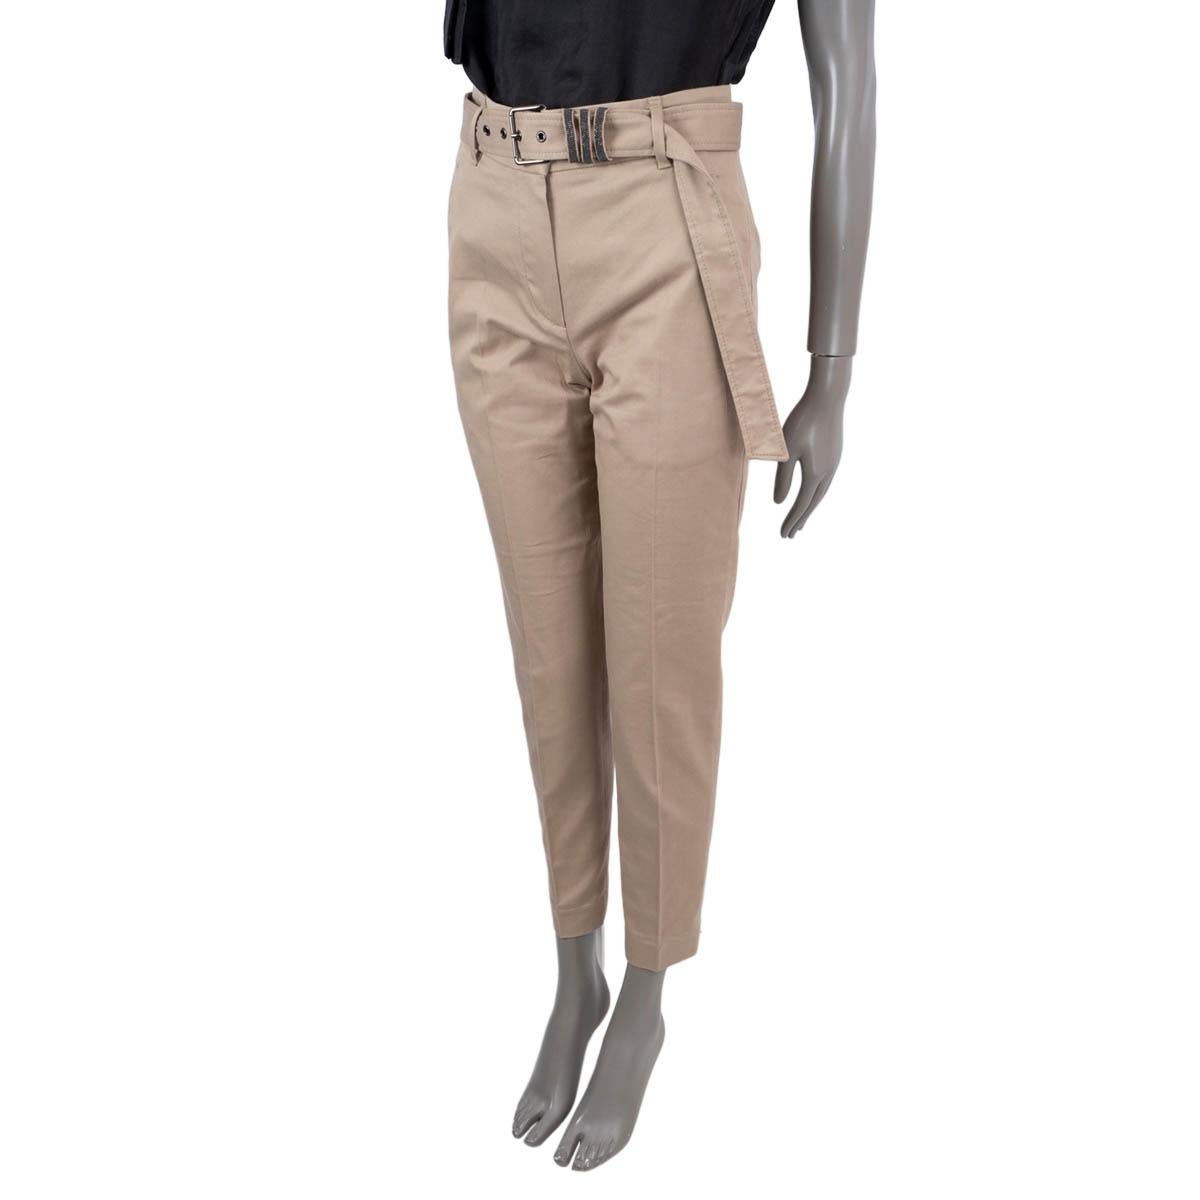 100% authentic Brunello Cucinelli Monili belted cigarette pants in taupe twill cotton (99%) and elastane (1%).  The design features a slim silhouette, slit pockets on the side and and on the back. Have been worn and are in excellent condition.

2014